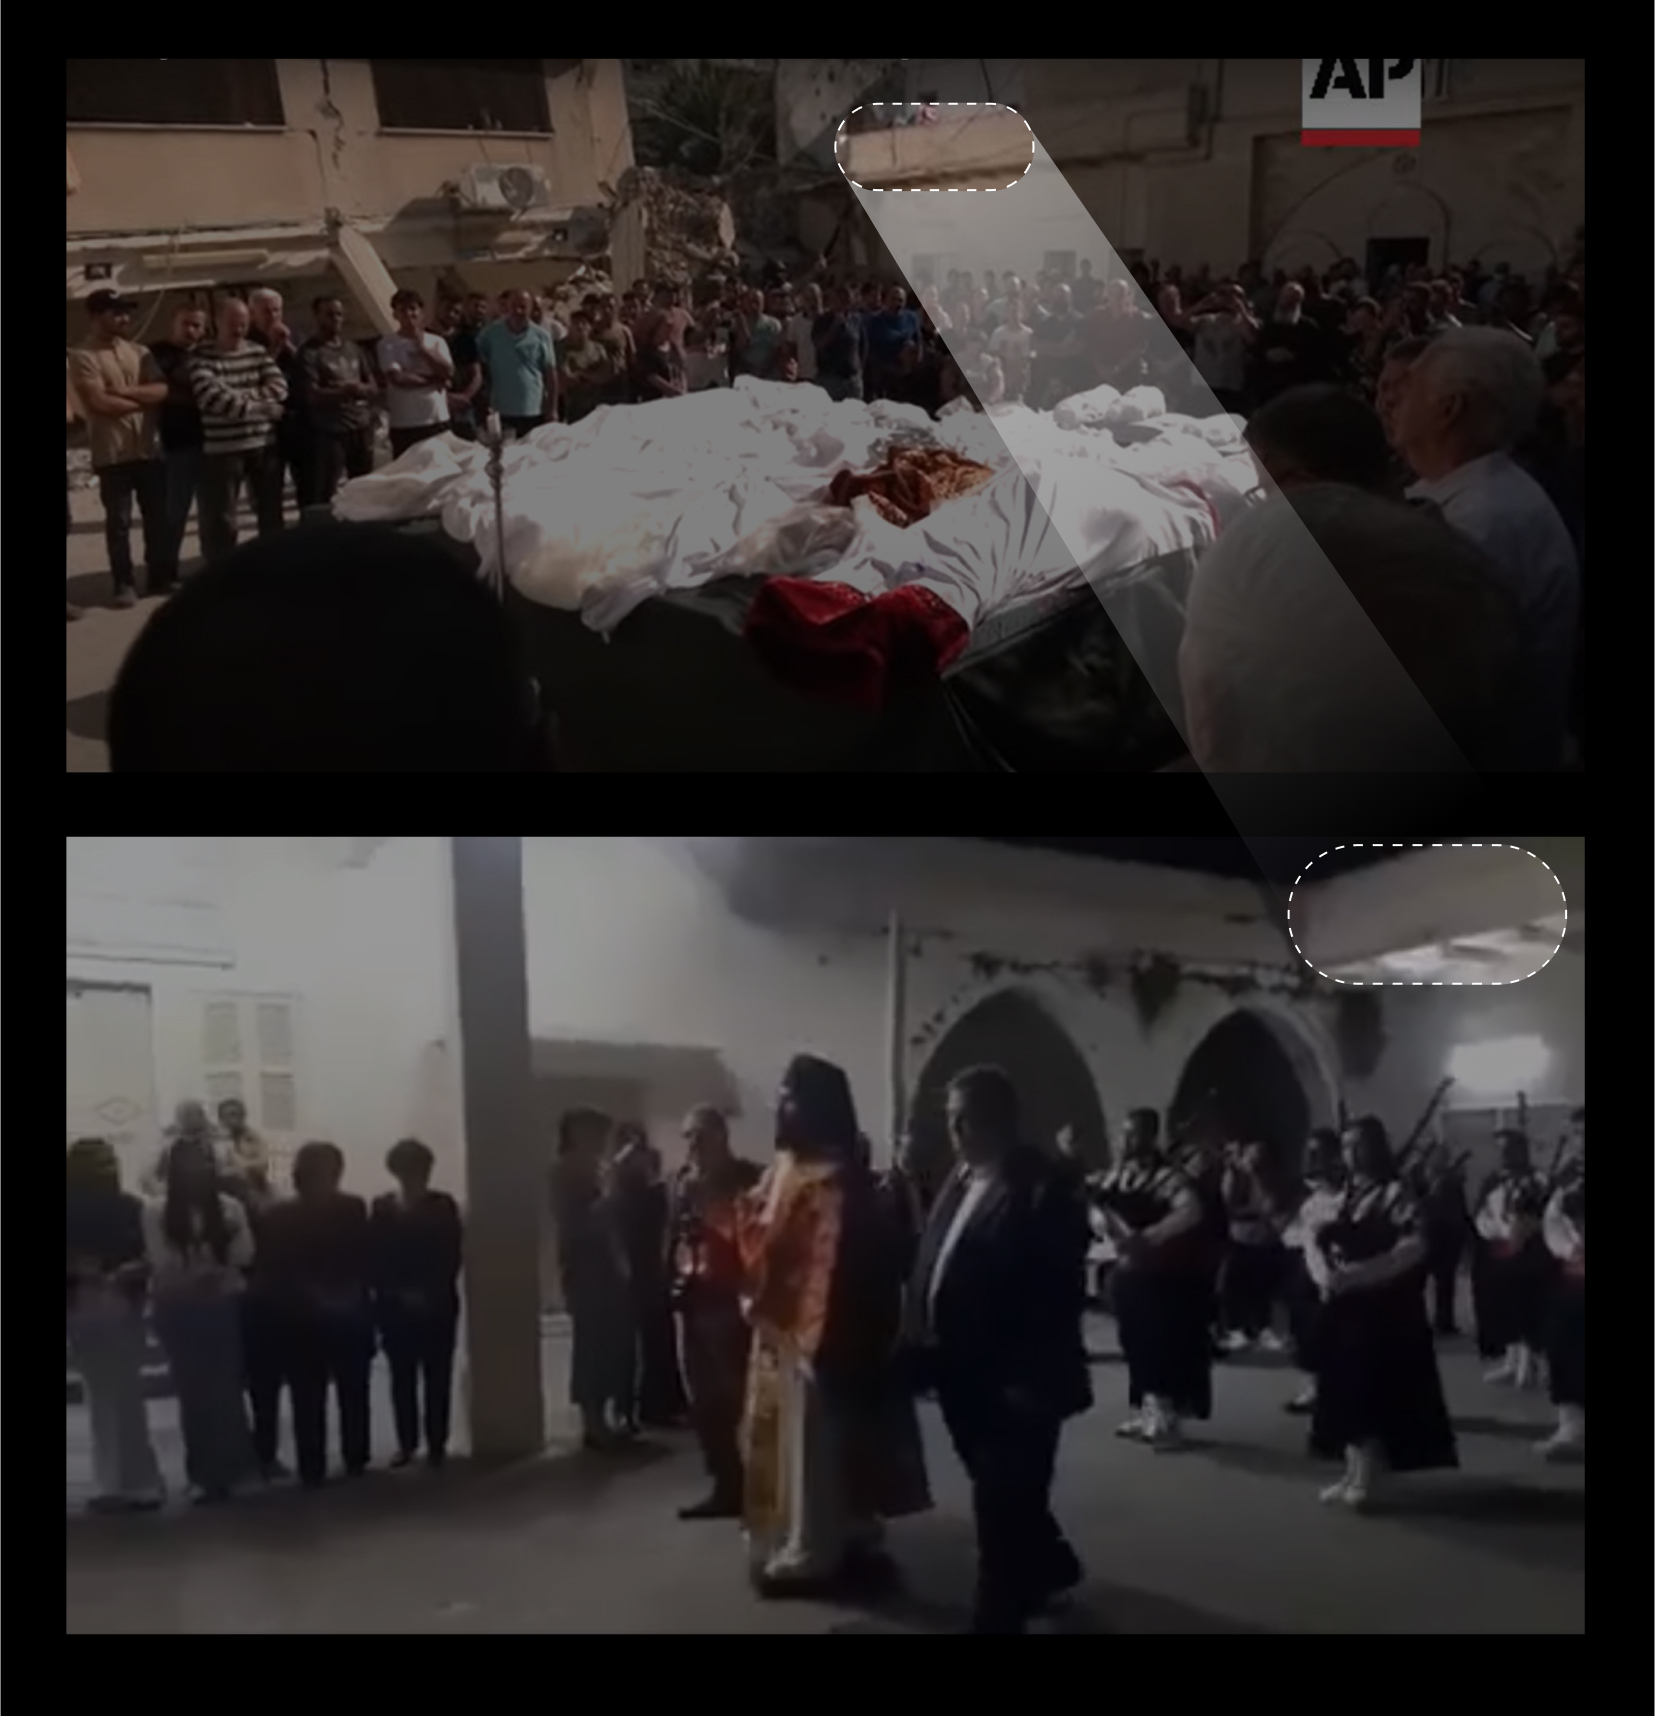 Images from a funeral, and ceremonies from inside the church compound.